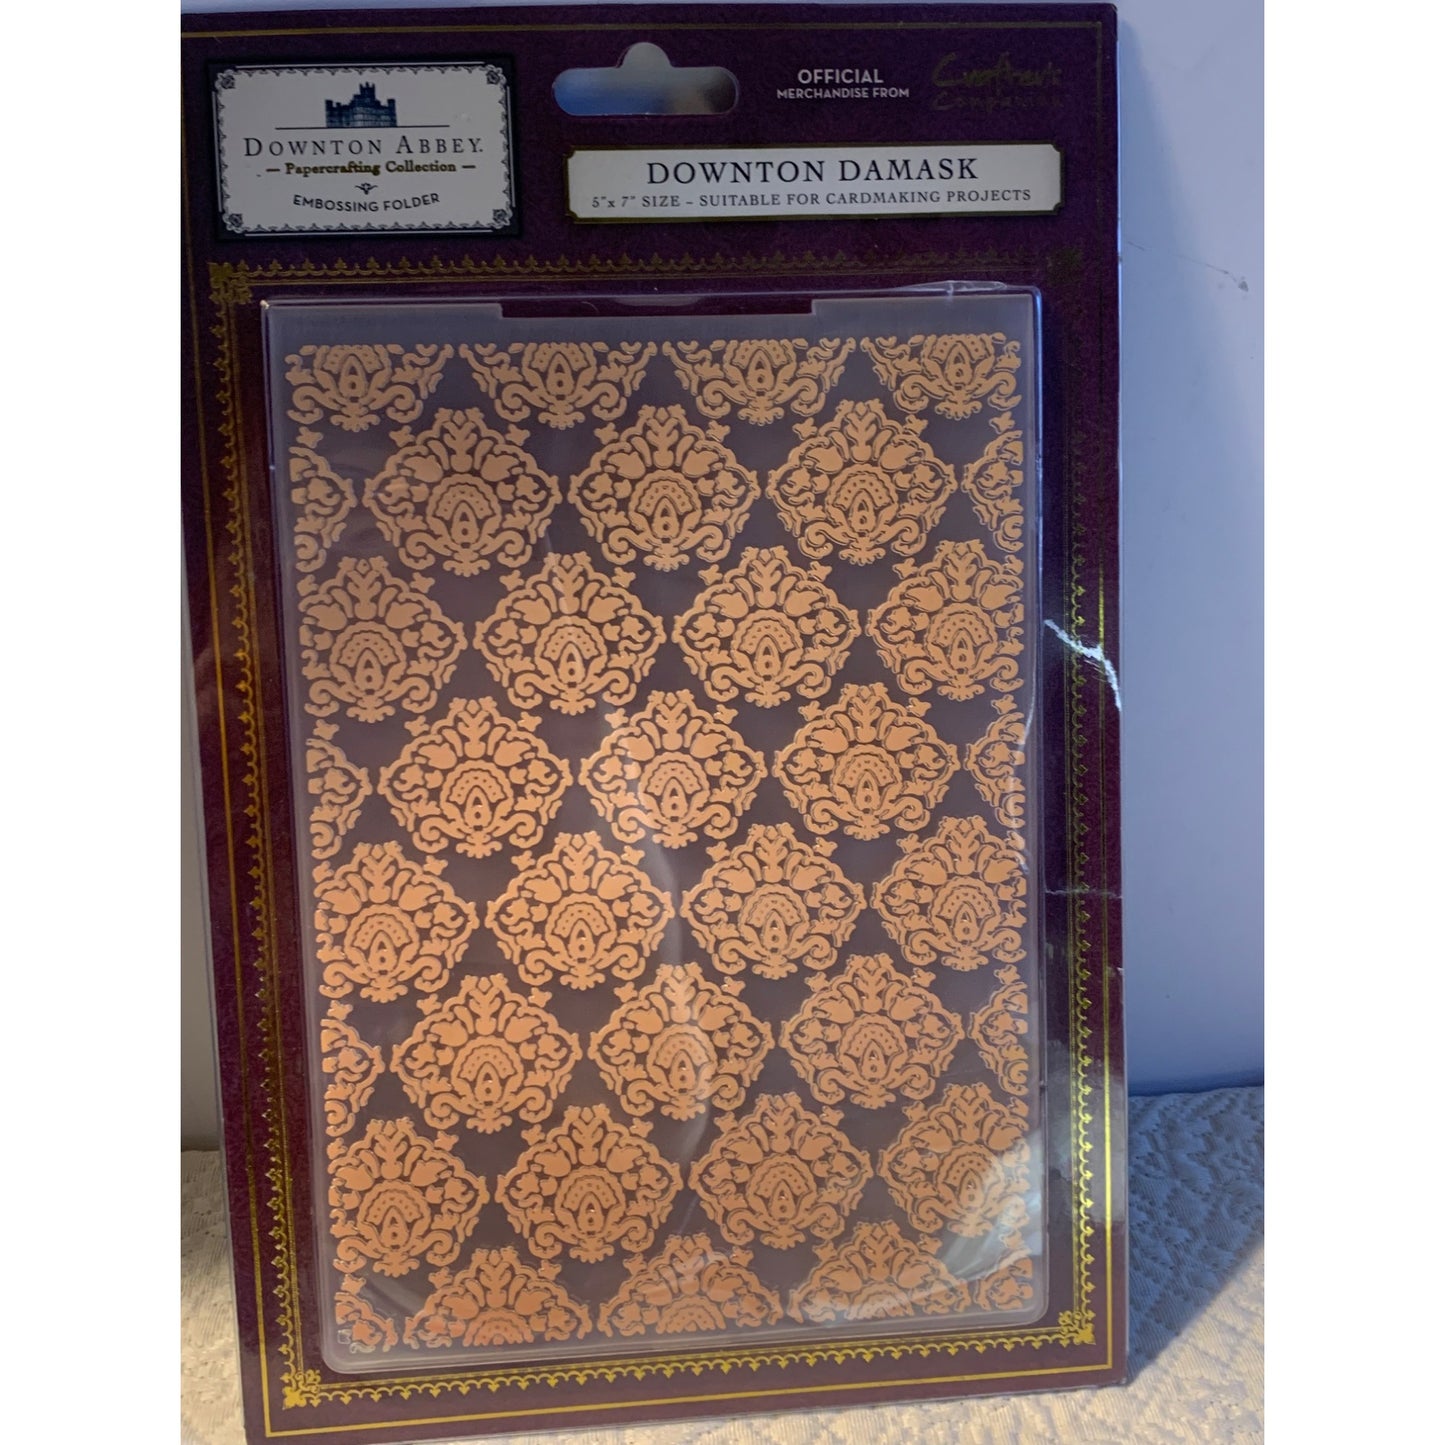 Crafters Companion Downtown Abbey Downtown Damask embossing folder